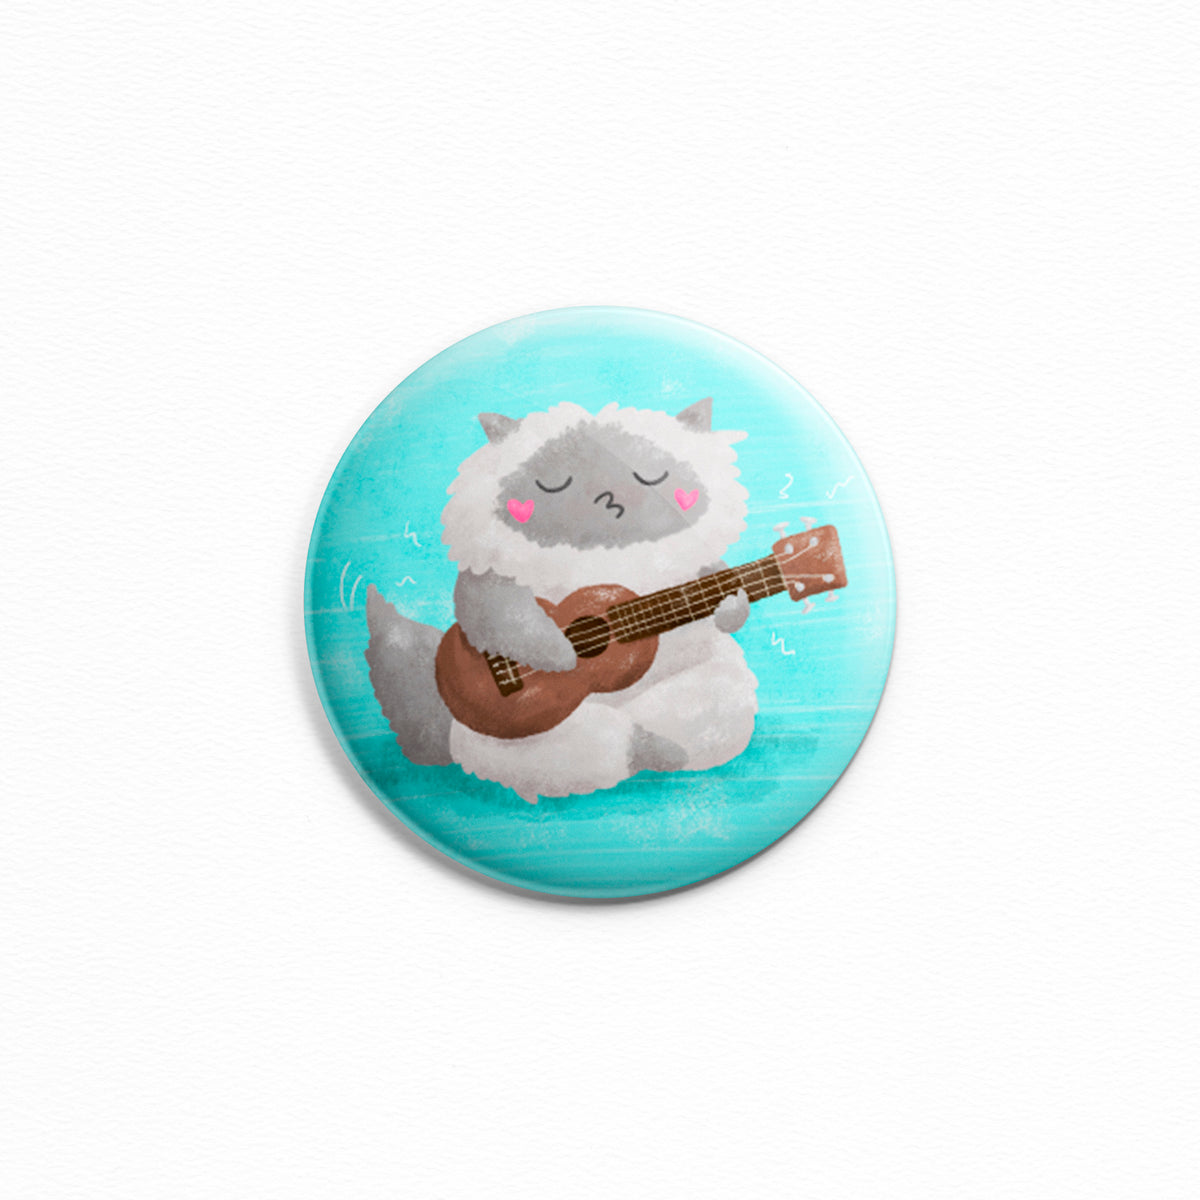 Ukulele Cat - Button or magnet with a digital painting of a cat playing the ukulele and singing.